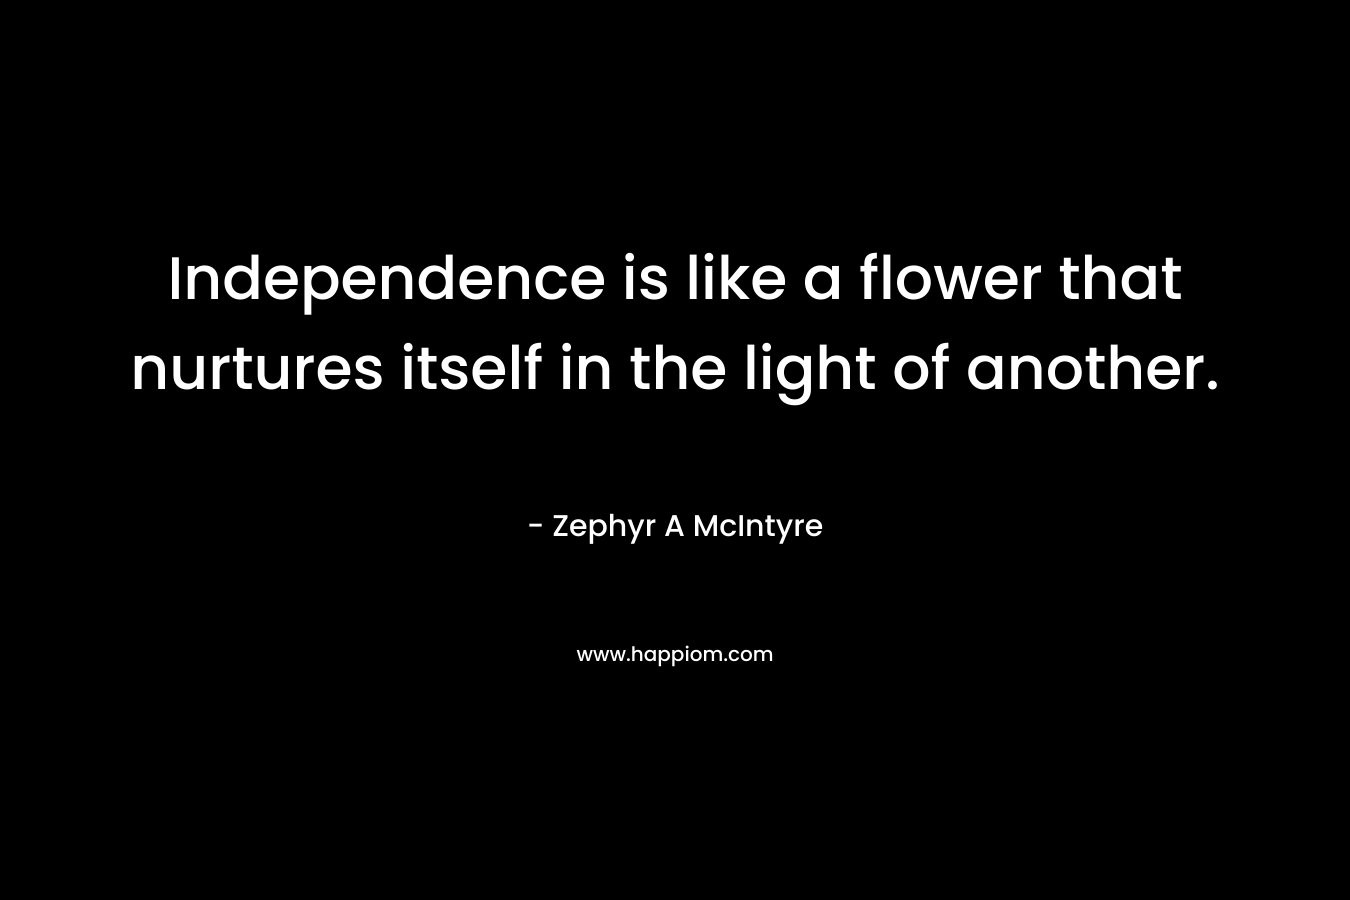 Independence is like a flower that nurtures itself in the light of another.